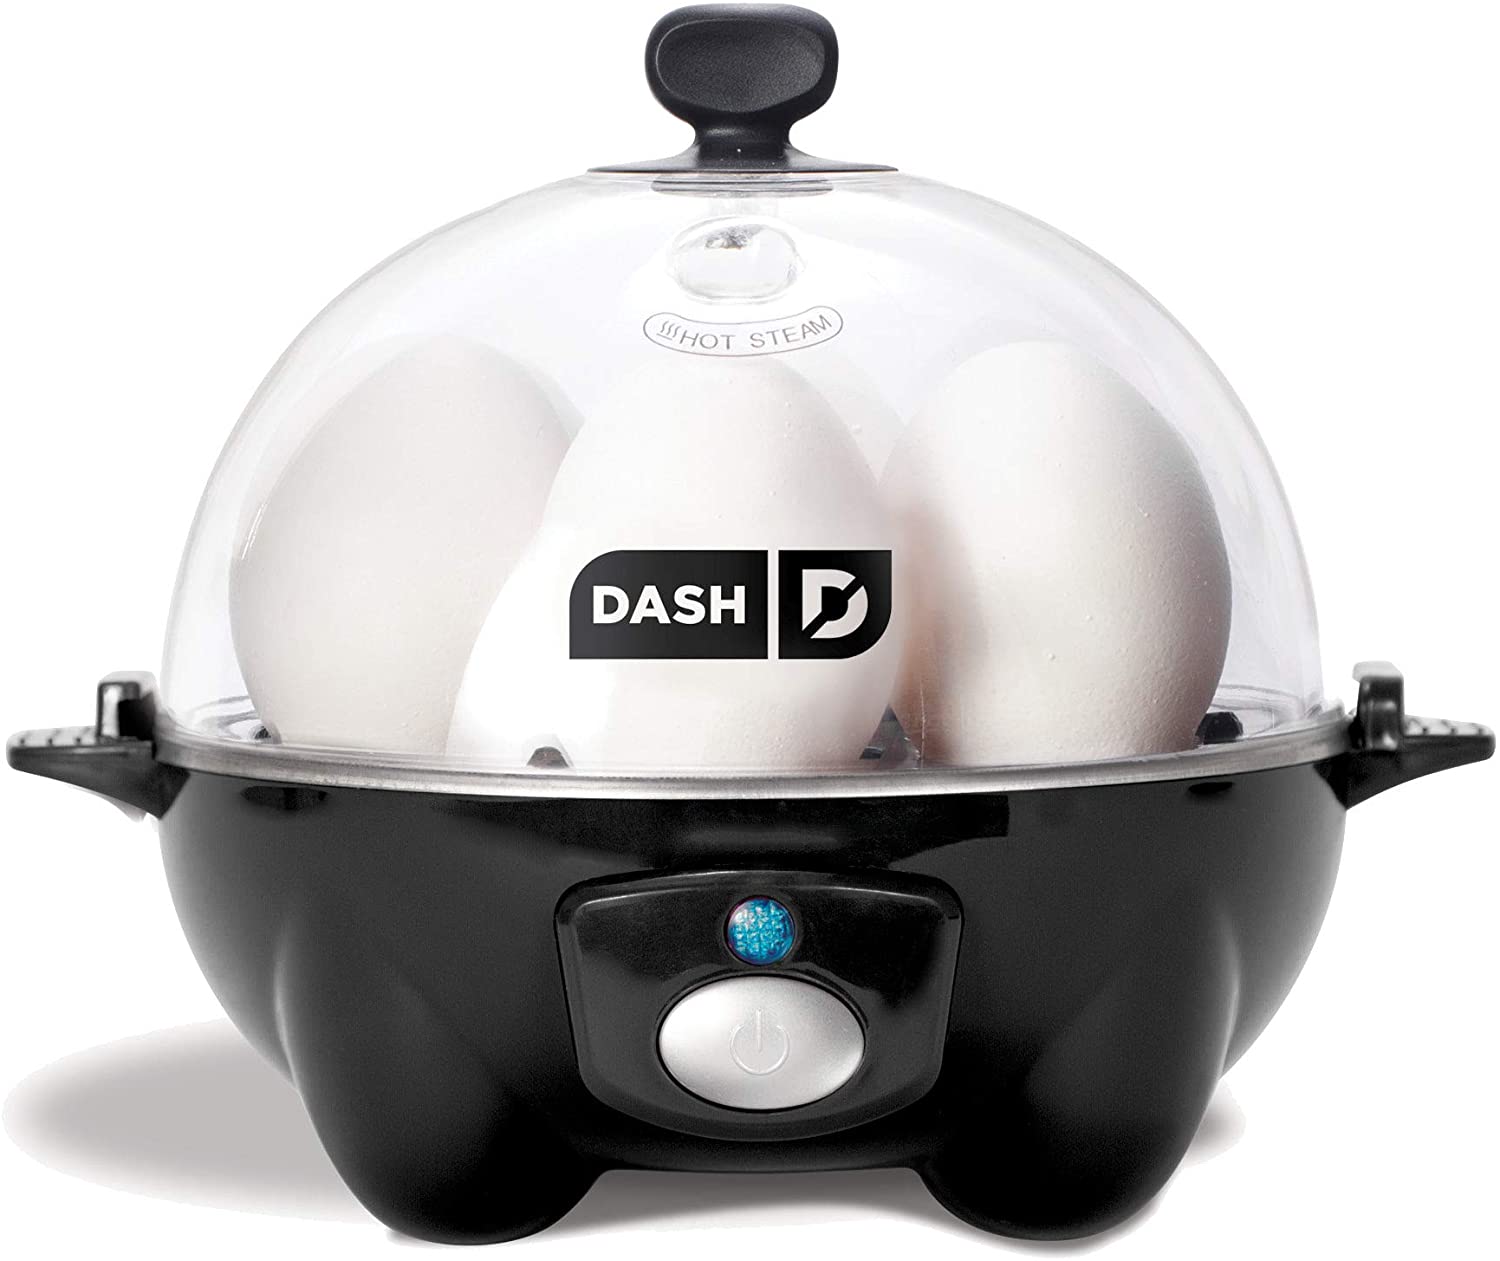 Poached One Size Scrambled Eggs DASH black Rapid 6 Capacity Electric Cooker for Hard Boiled or Omelets with Auto Shut Off Feature